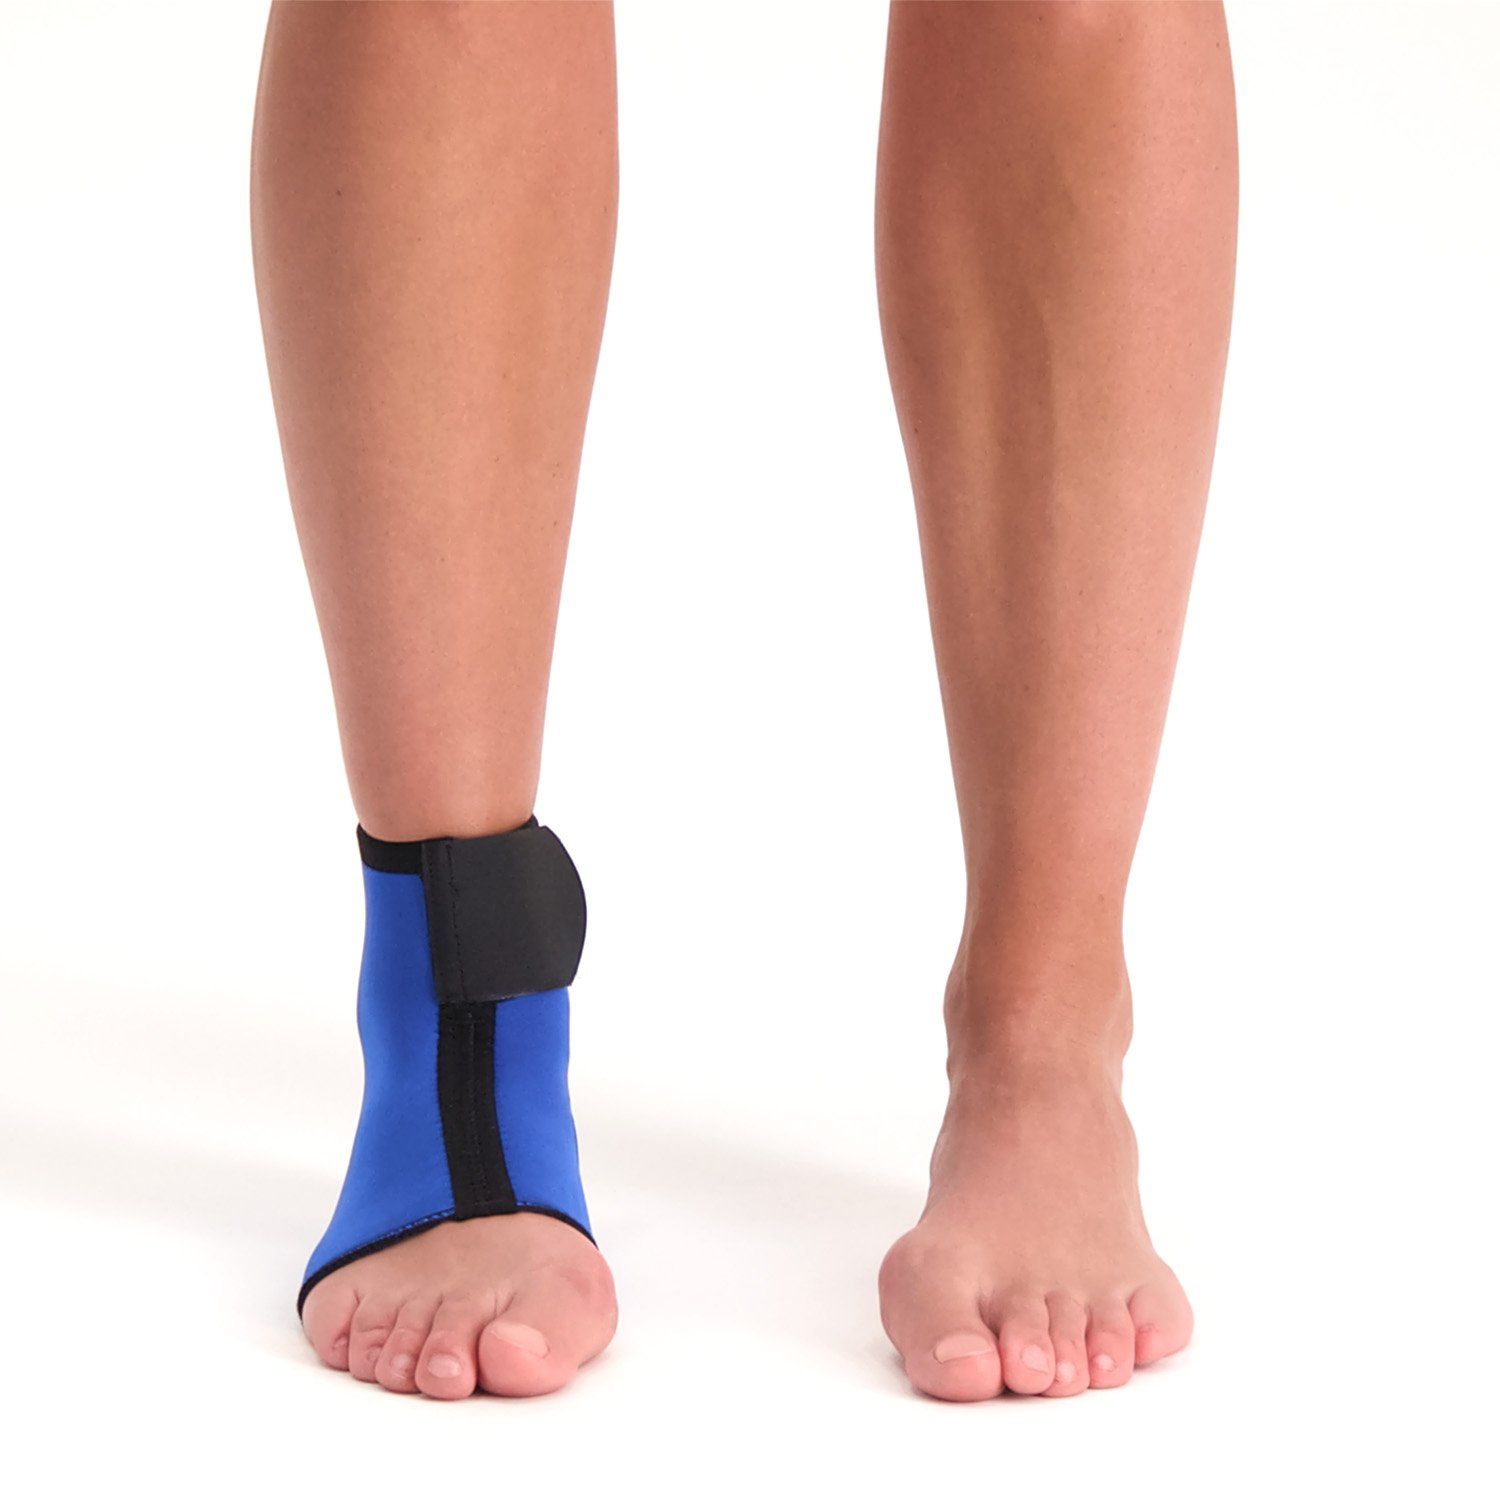 Morsa Childrens Ankle Support front view